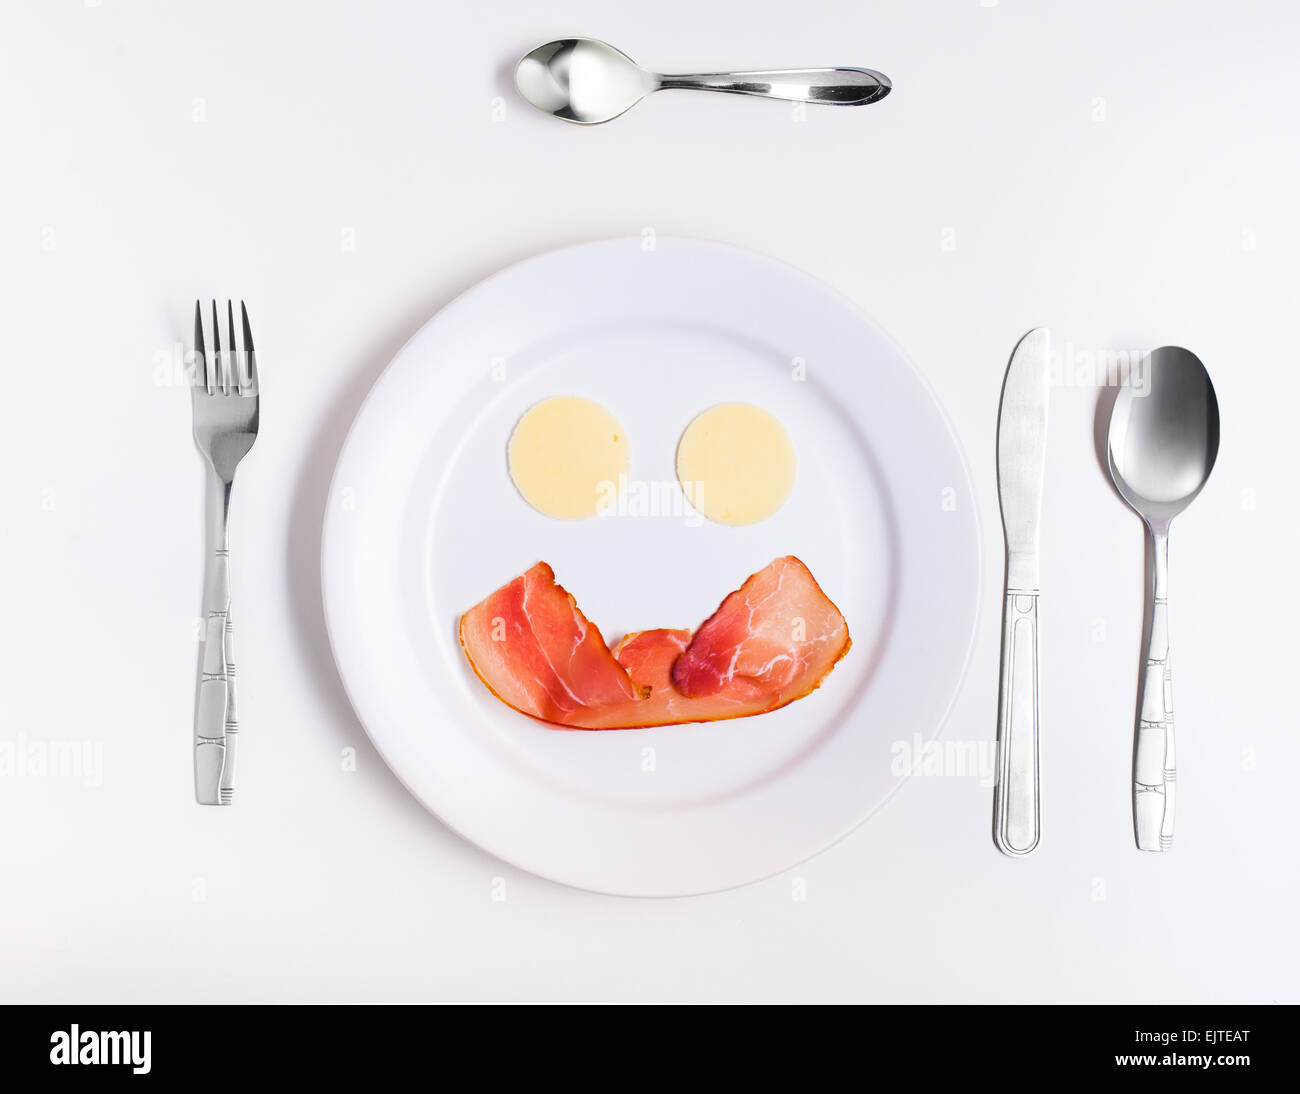 fun food, smiley face from cheese and ham on a plate with cutlery Stock Photo